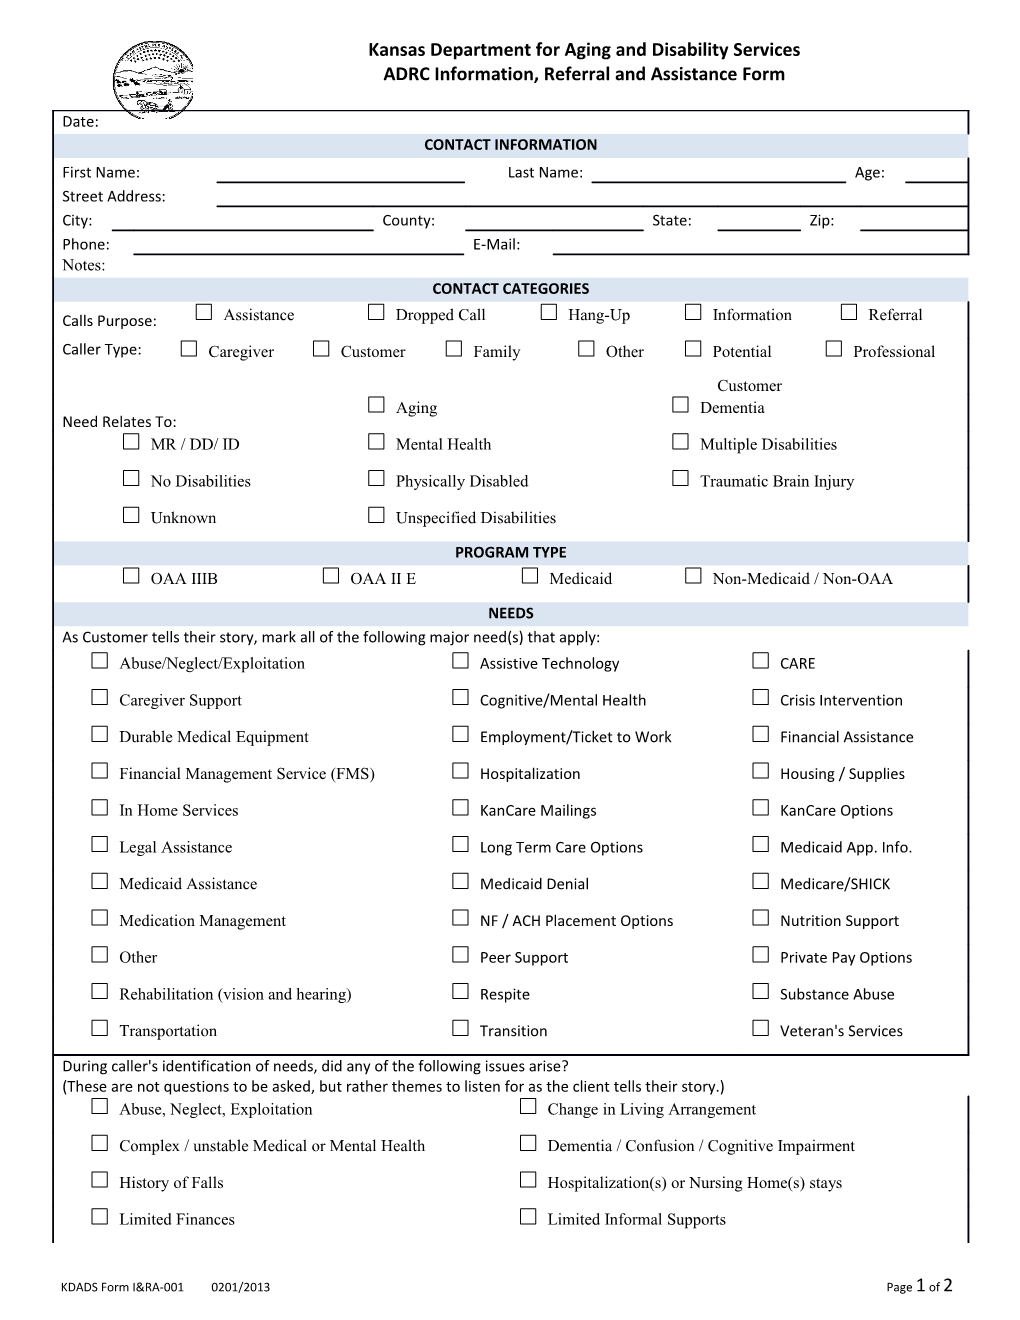 ADRC Information, Referral and Assistance Form